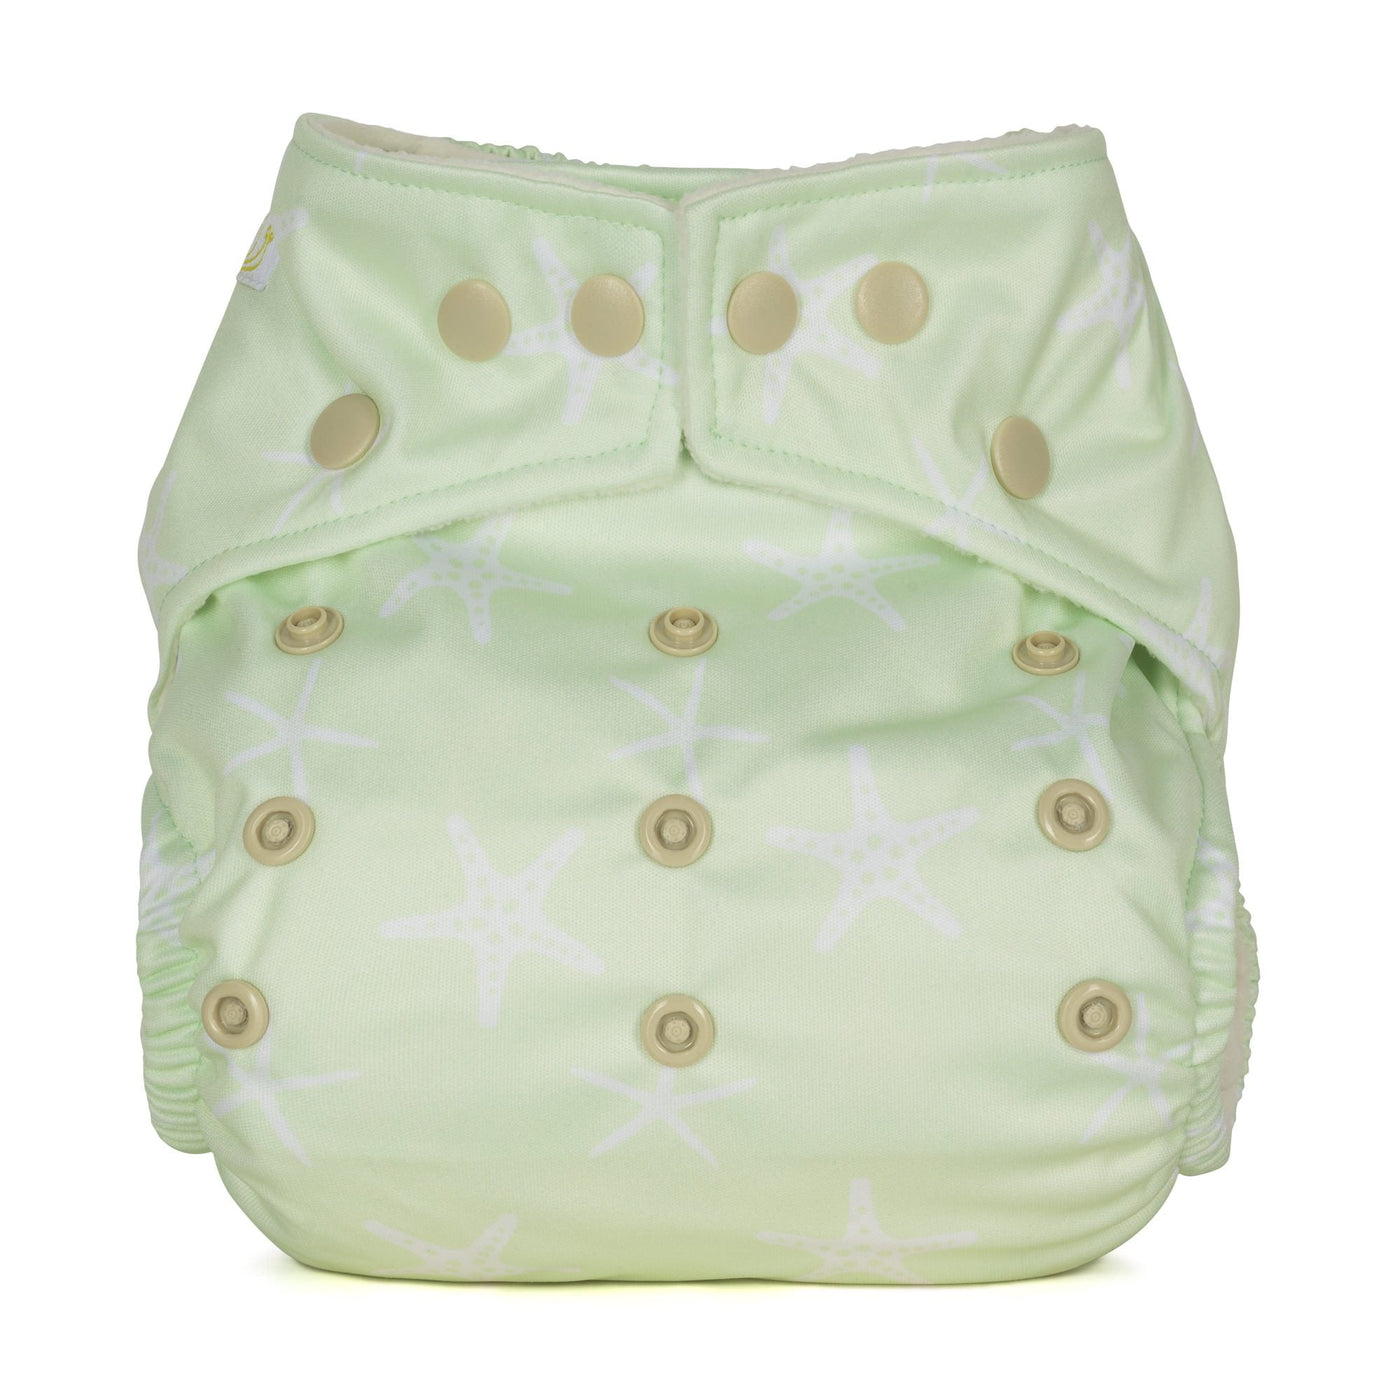 Baba + Boo| One Size Reusable Nappy - Prints | Earthlets.com |  | reusable nappies all in one nappies